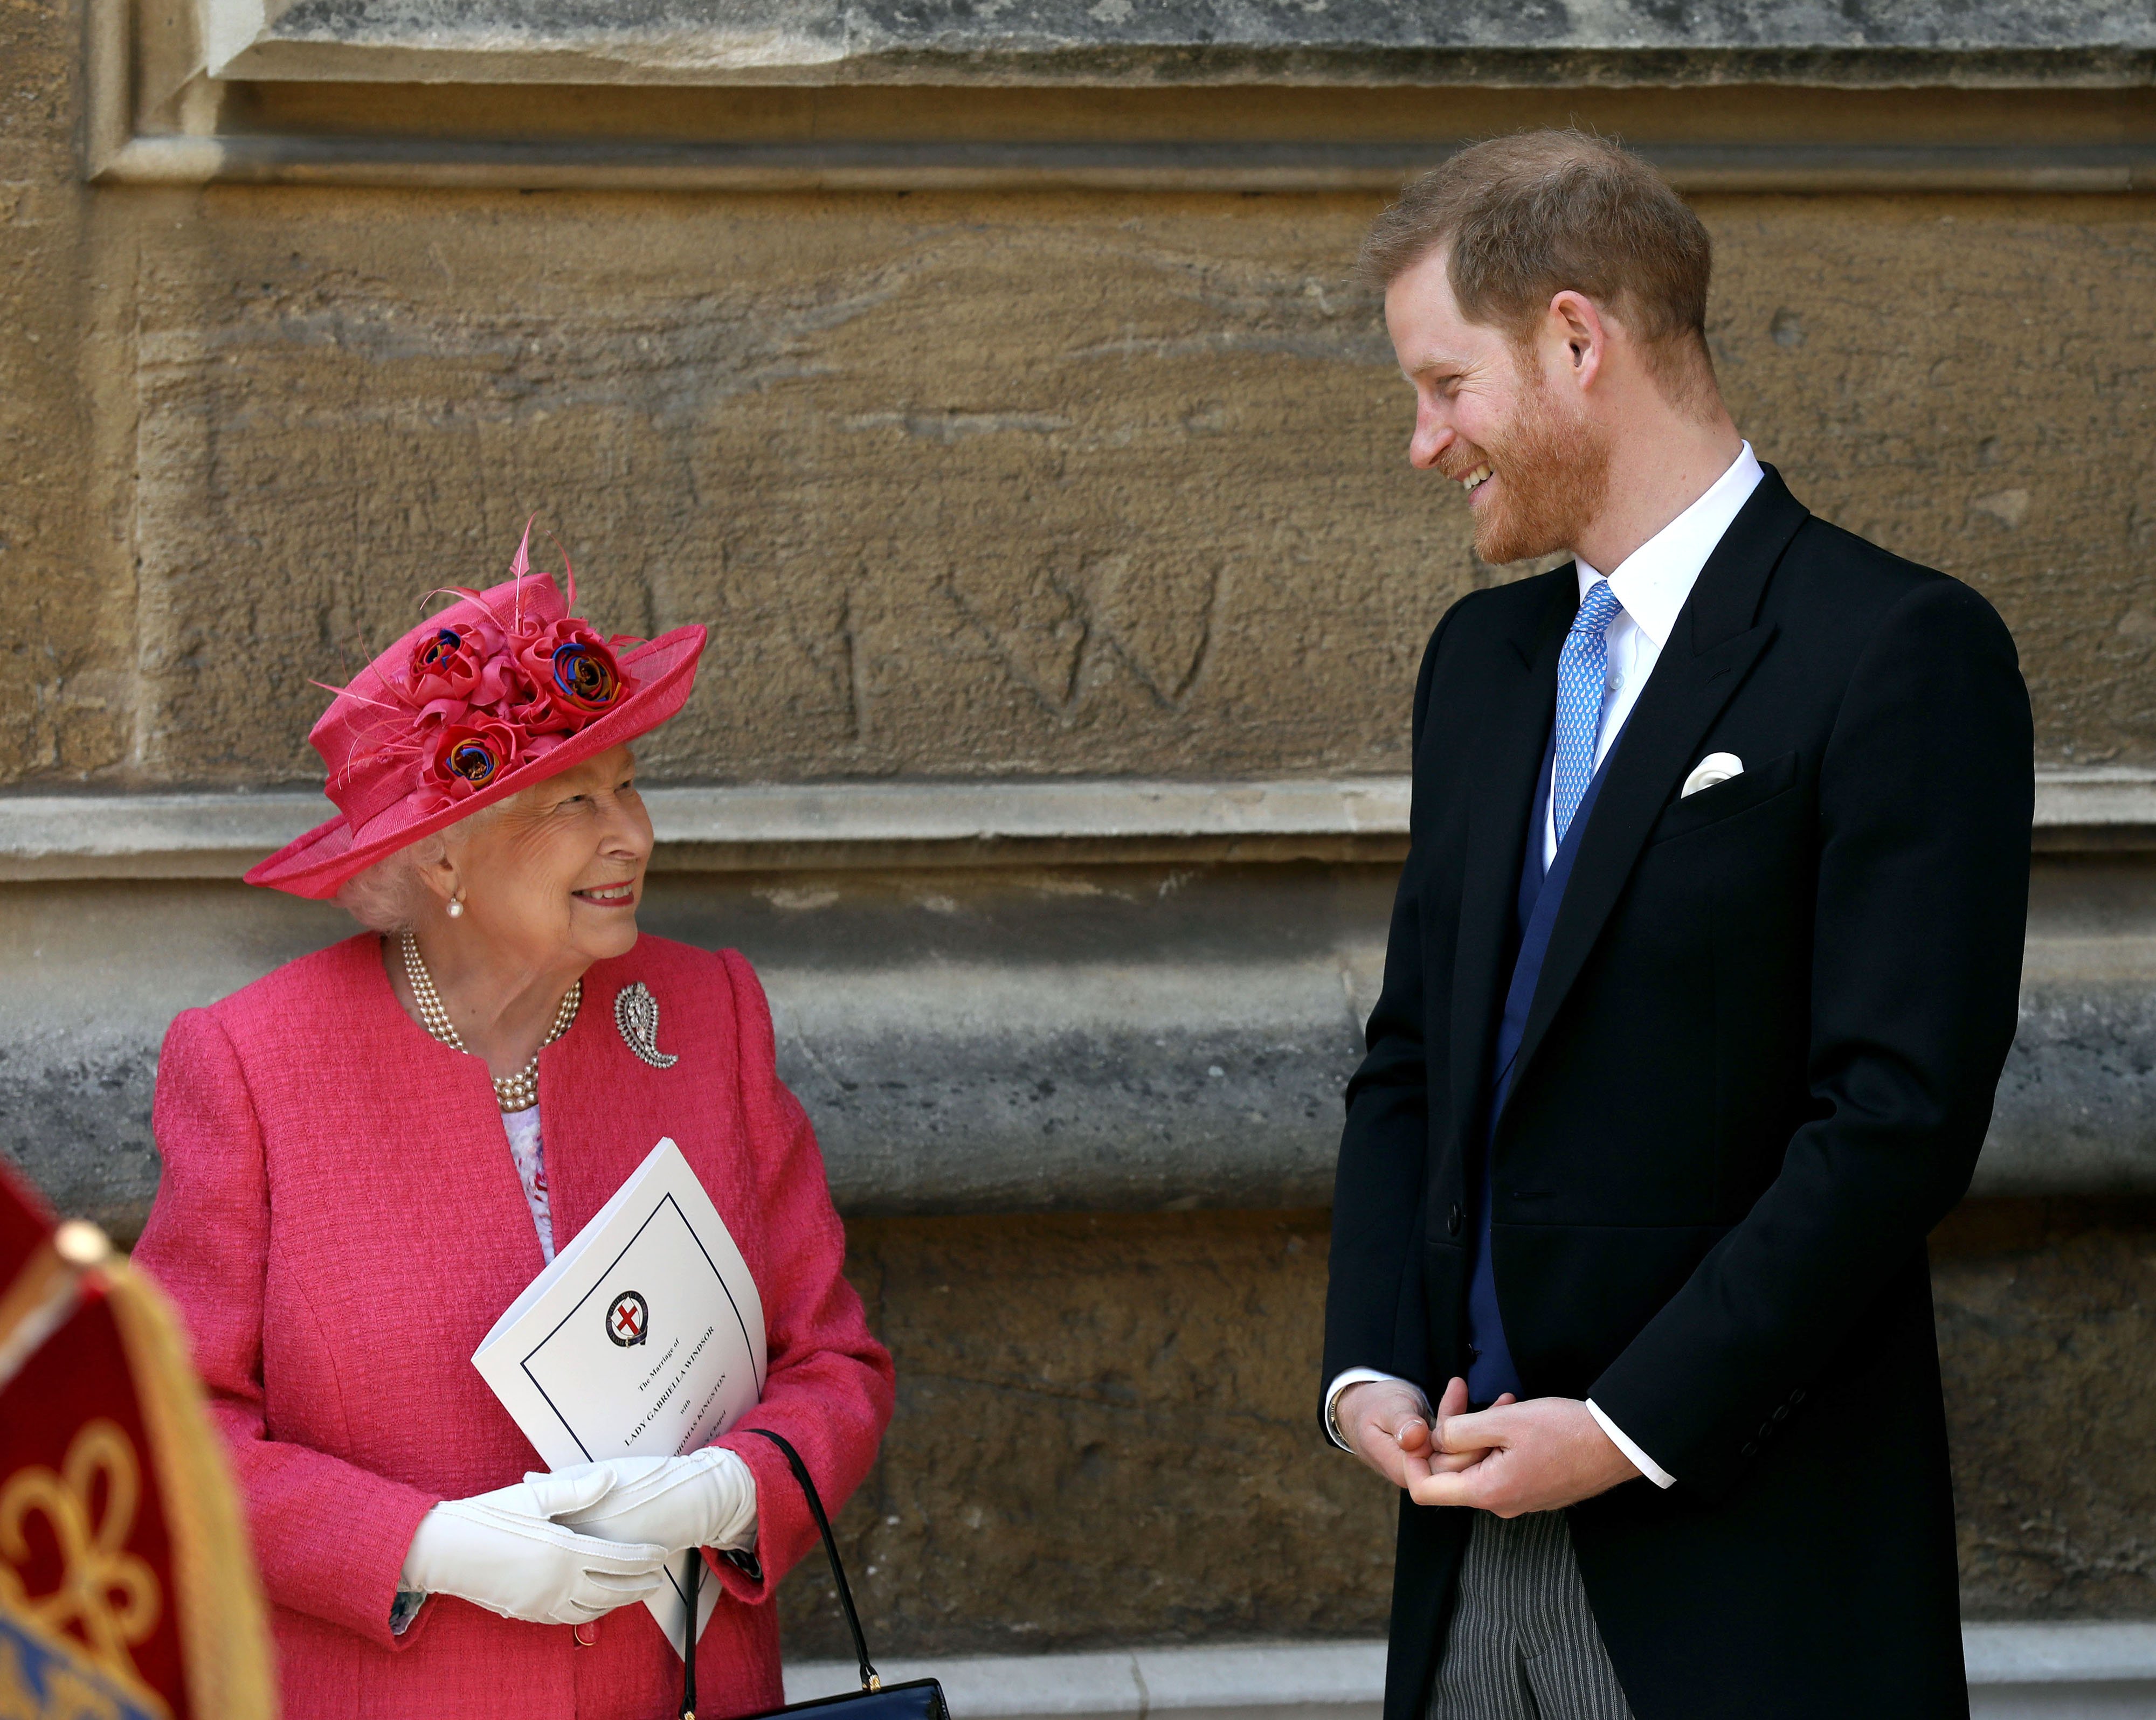  Queen Elizabeth II speaks with Prince Harry, Duke of Sussex as they leave after the wedding of Lady Gabriella Windsor to Thomas Kingston at St George's Chapel, Windsor Castle on May 18, 2019 in Windsor, England | Source: Getty Images 